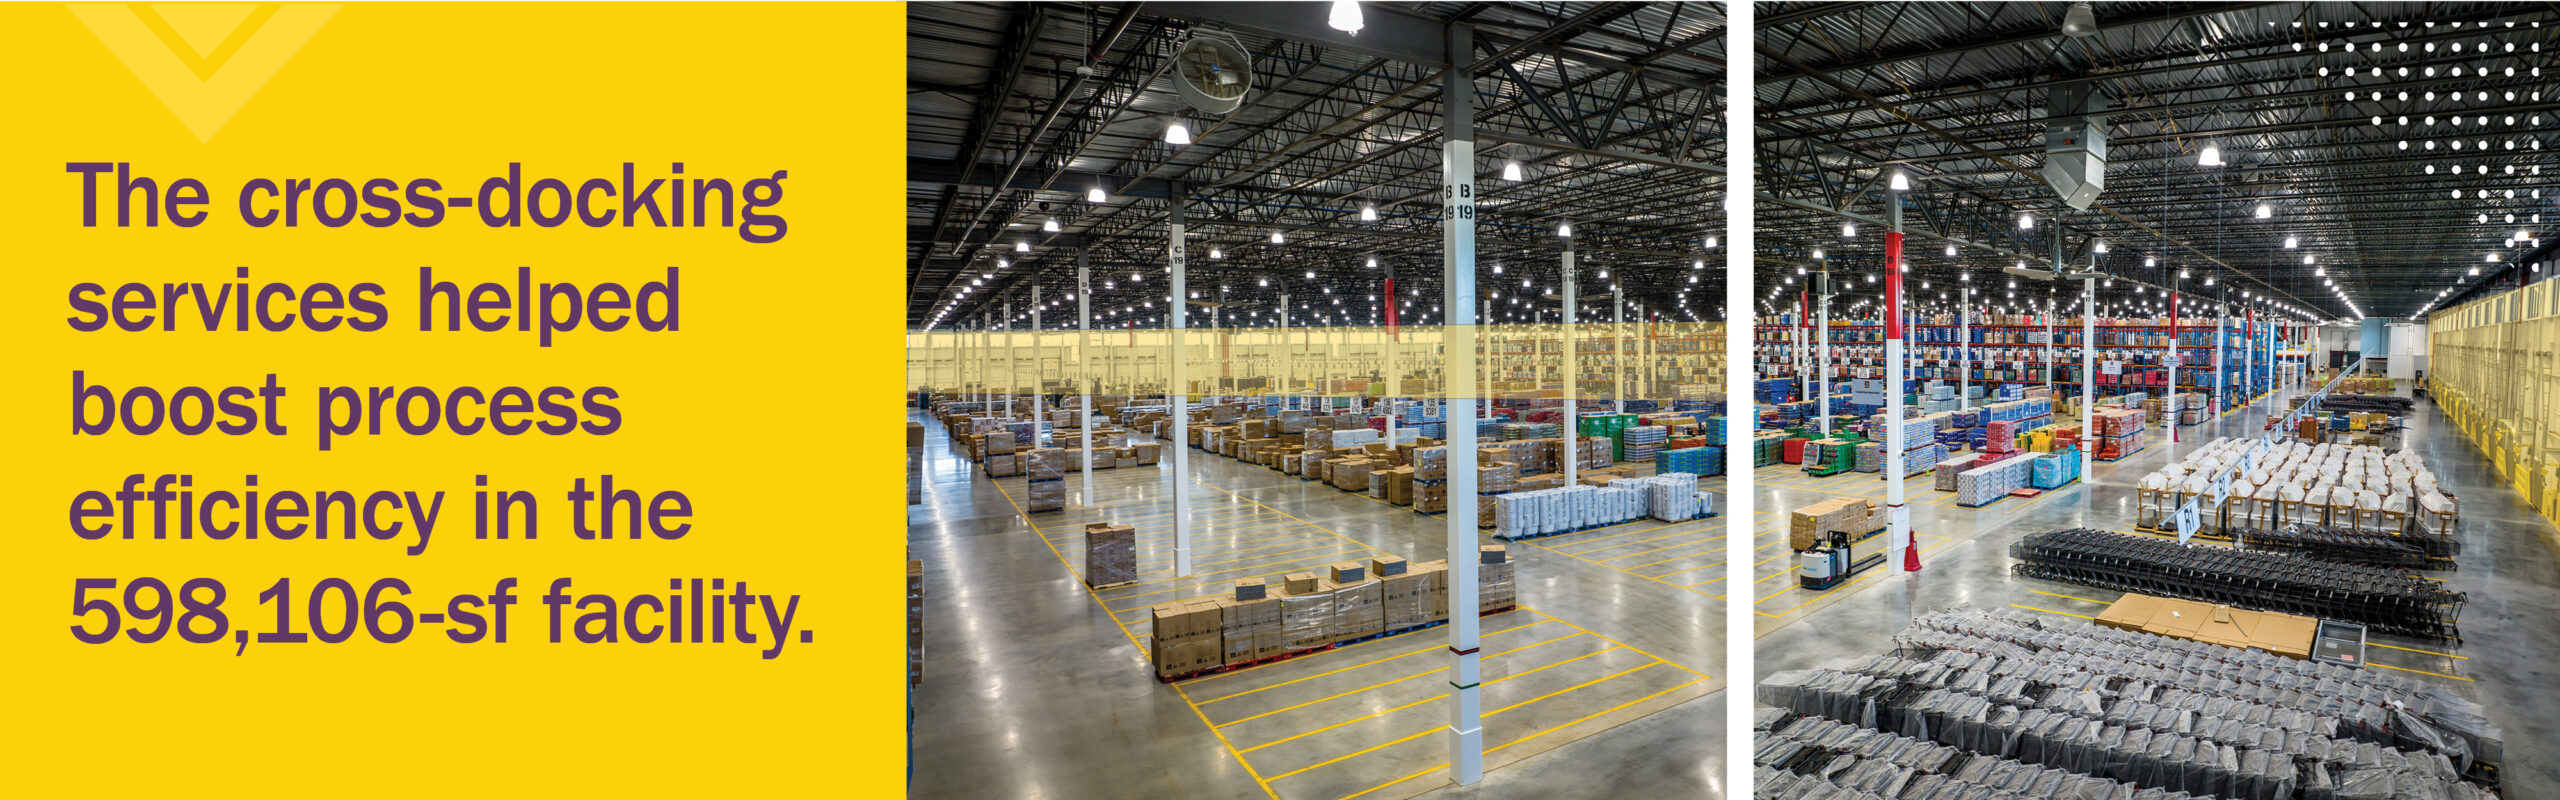 Design Solutions: The cross-docking services helped boost process efficiency in the 598,106-sf facility.